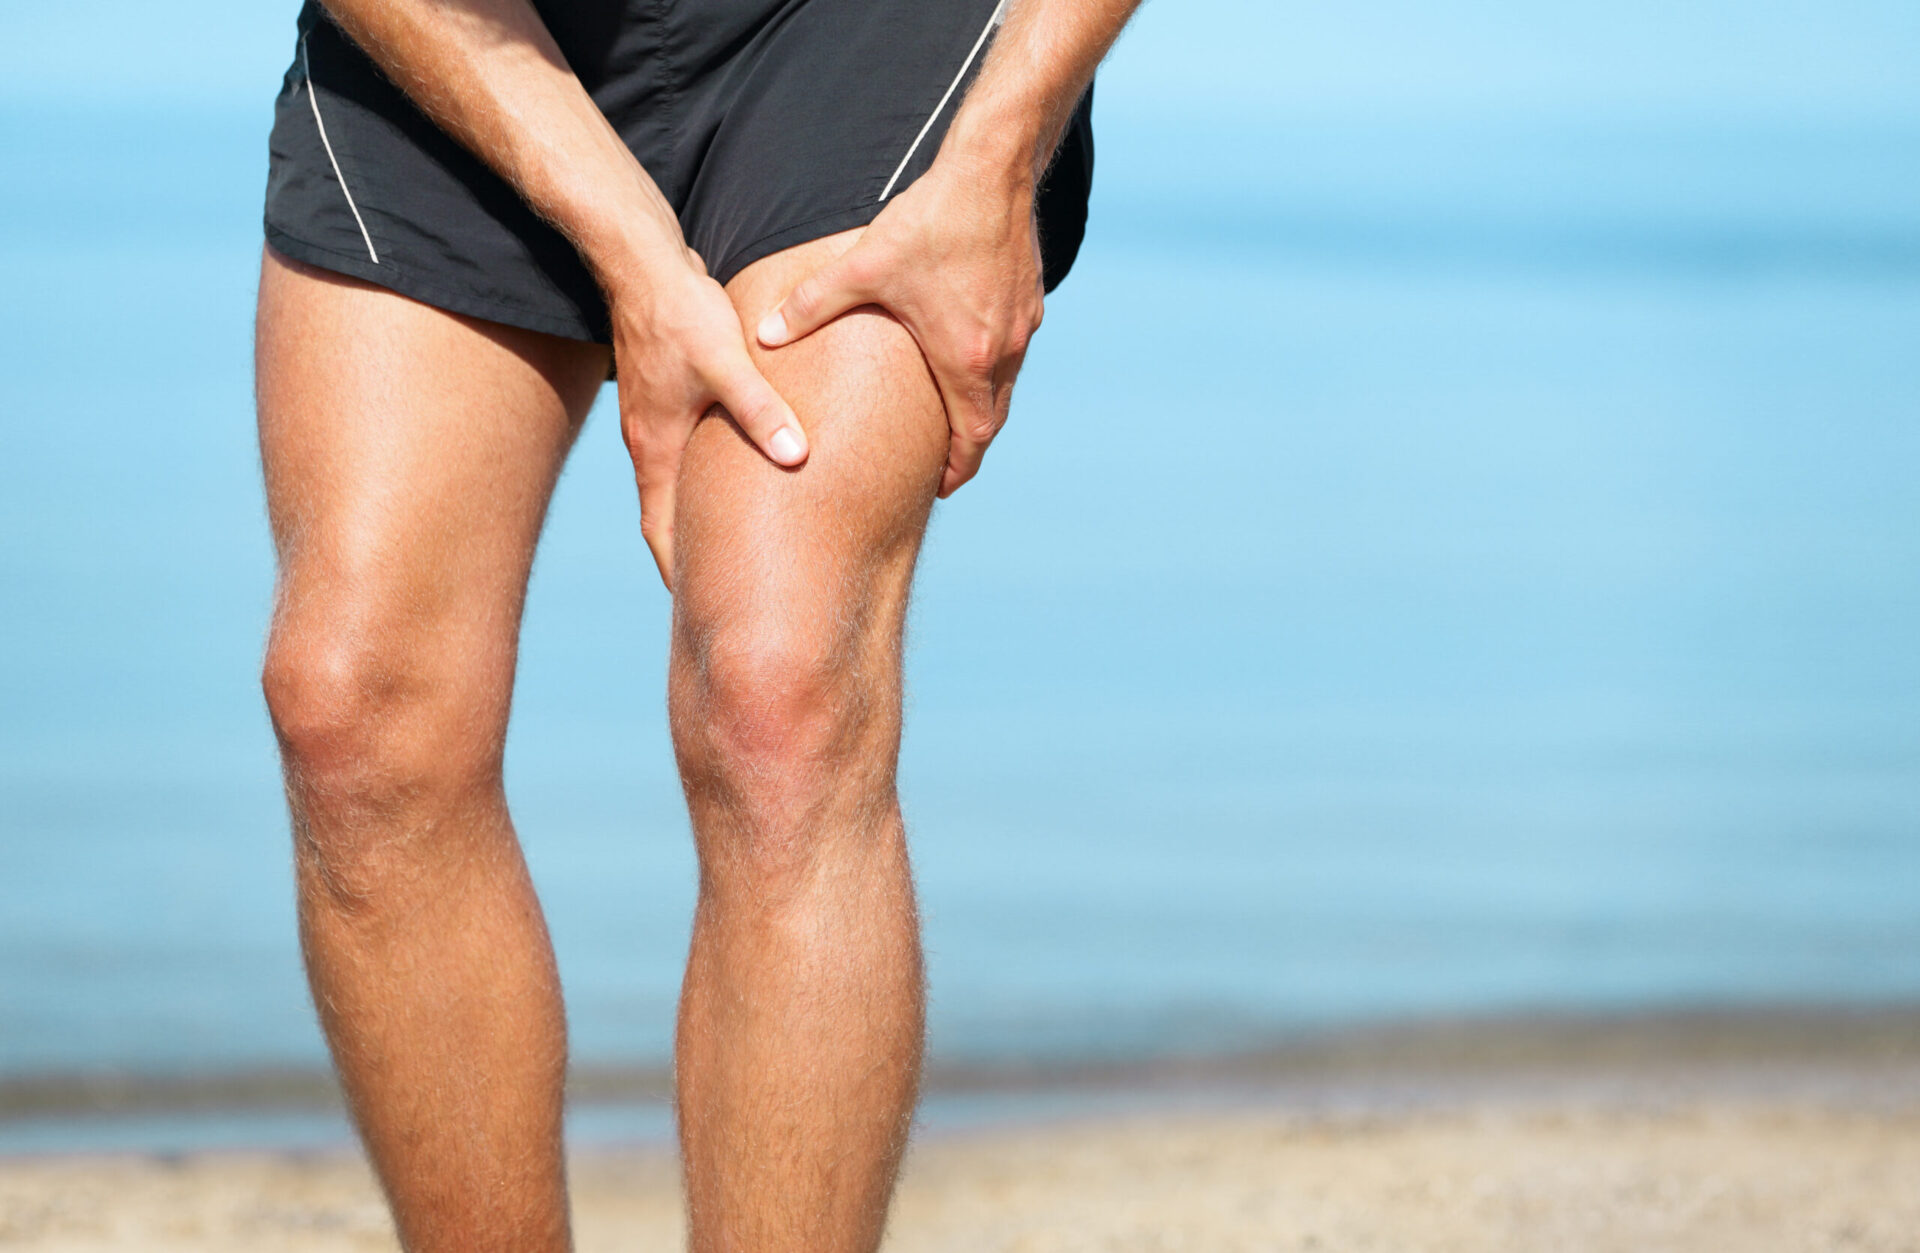 What Vitamin Deficiency Causes Muscle Cramps